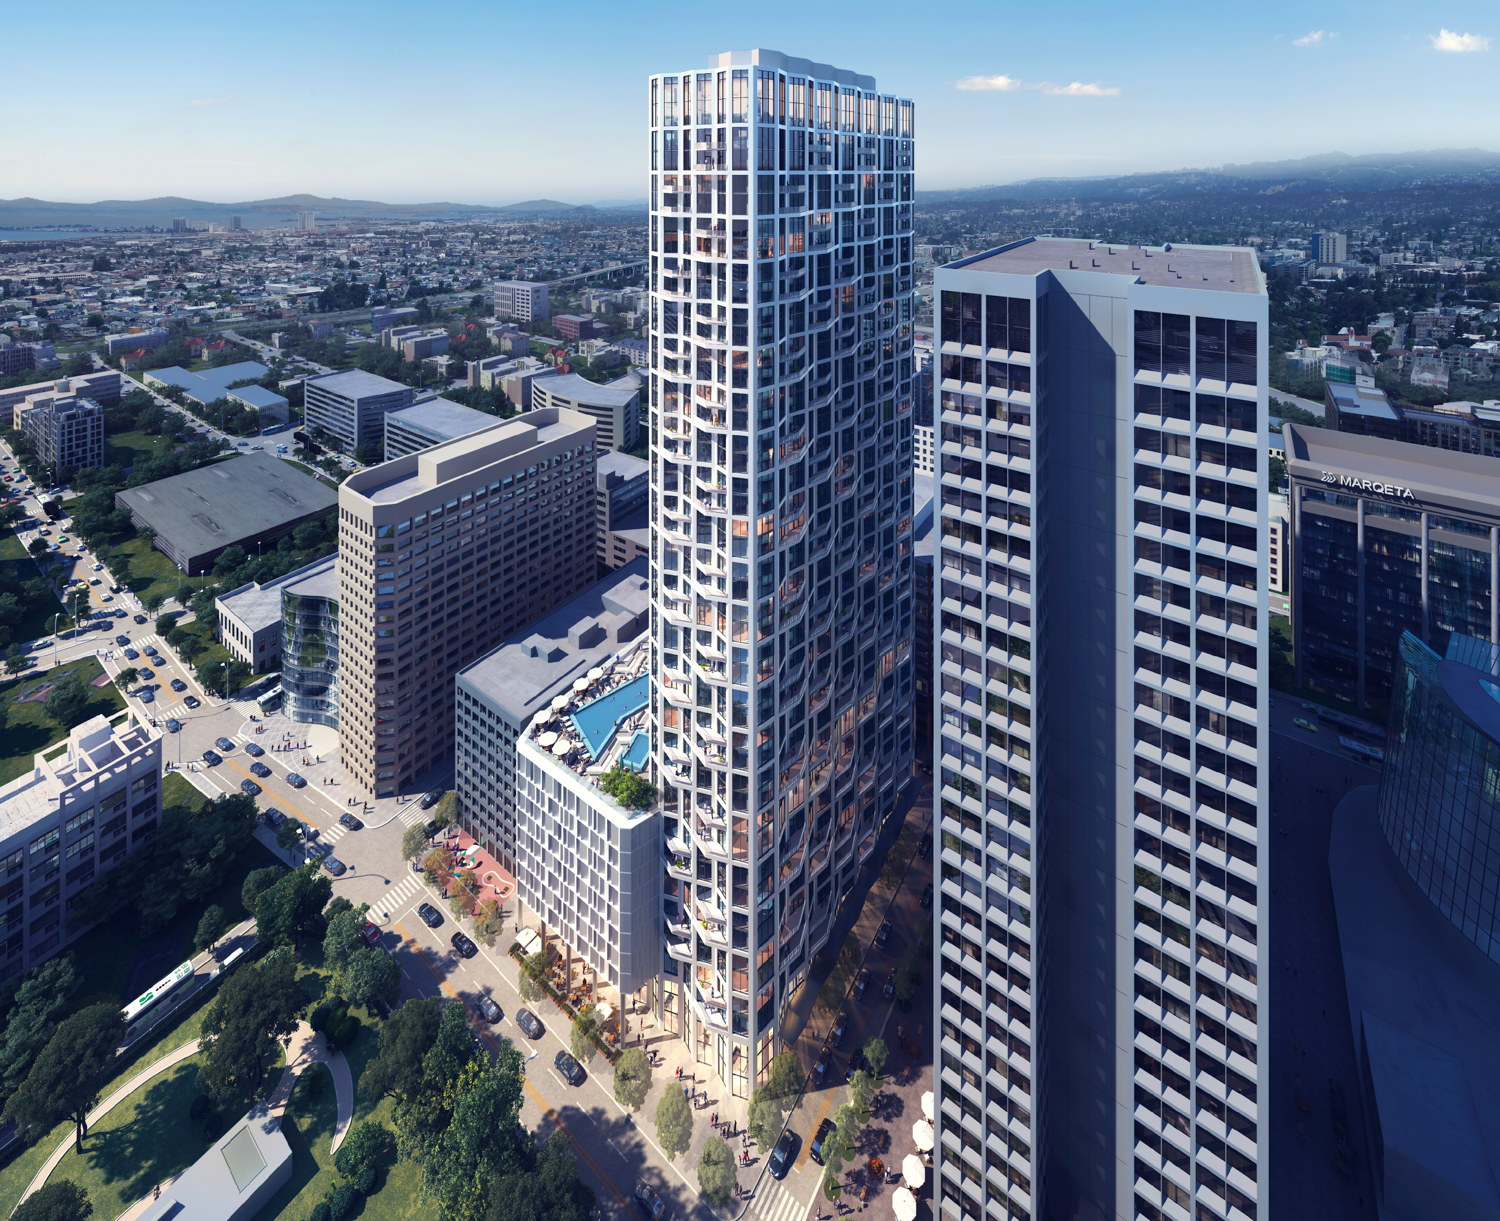 Town Tower aerial view from 21st Street and Kaiser Plaza, rendering by Solomon Cordwell Buenz